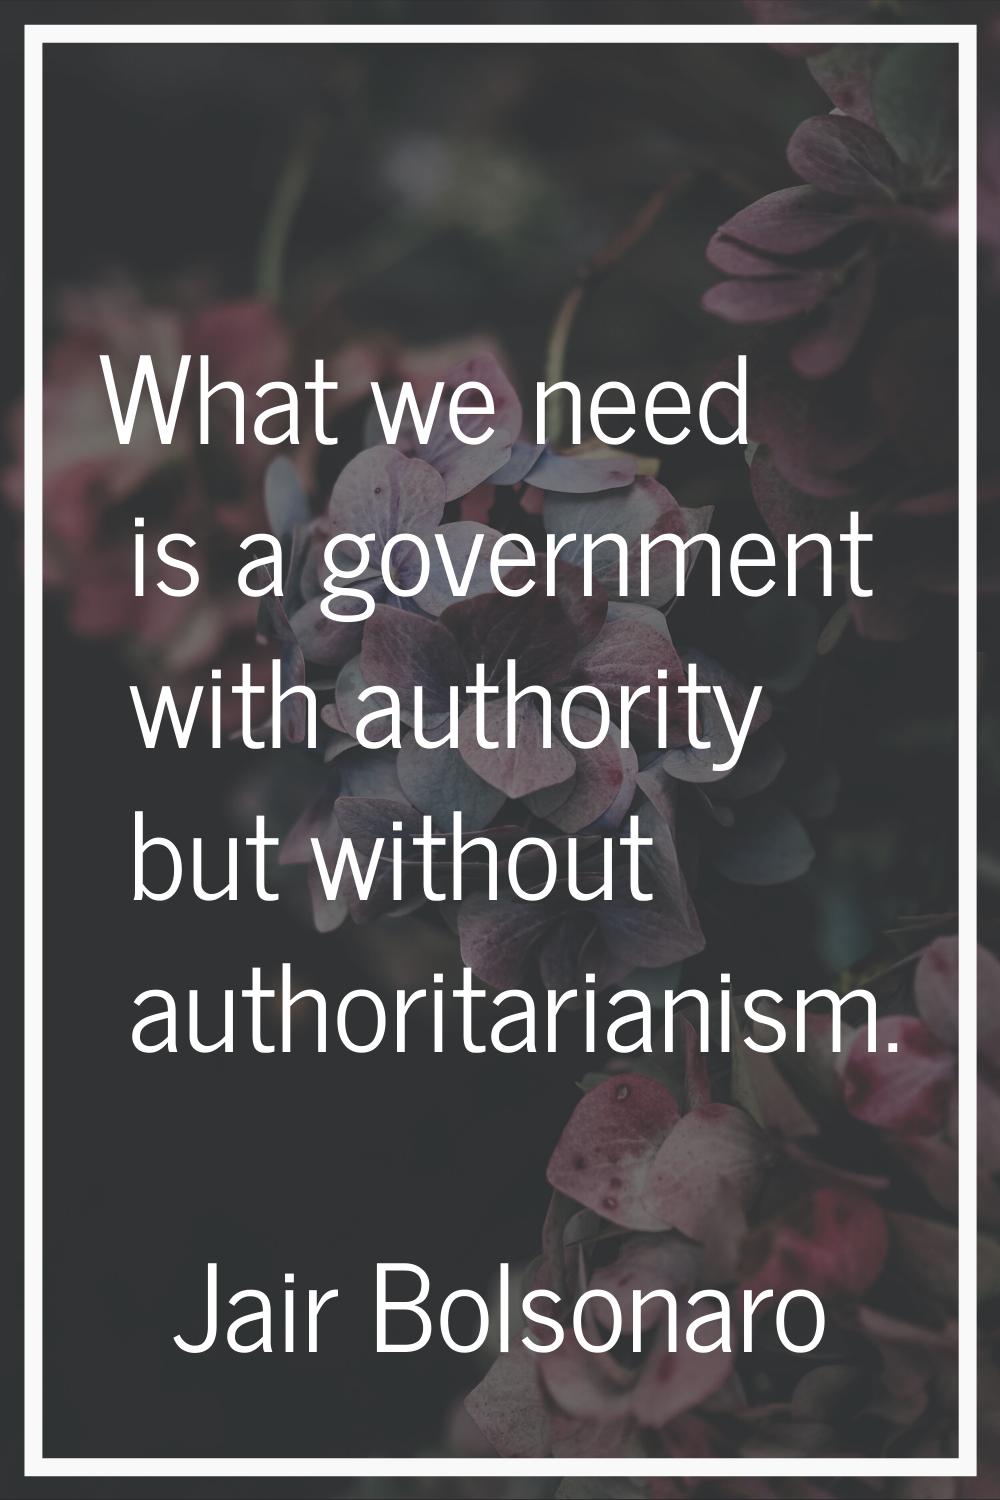 What we need is a government with authority but without authoritarianism.